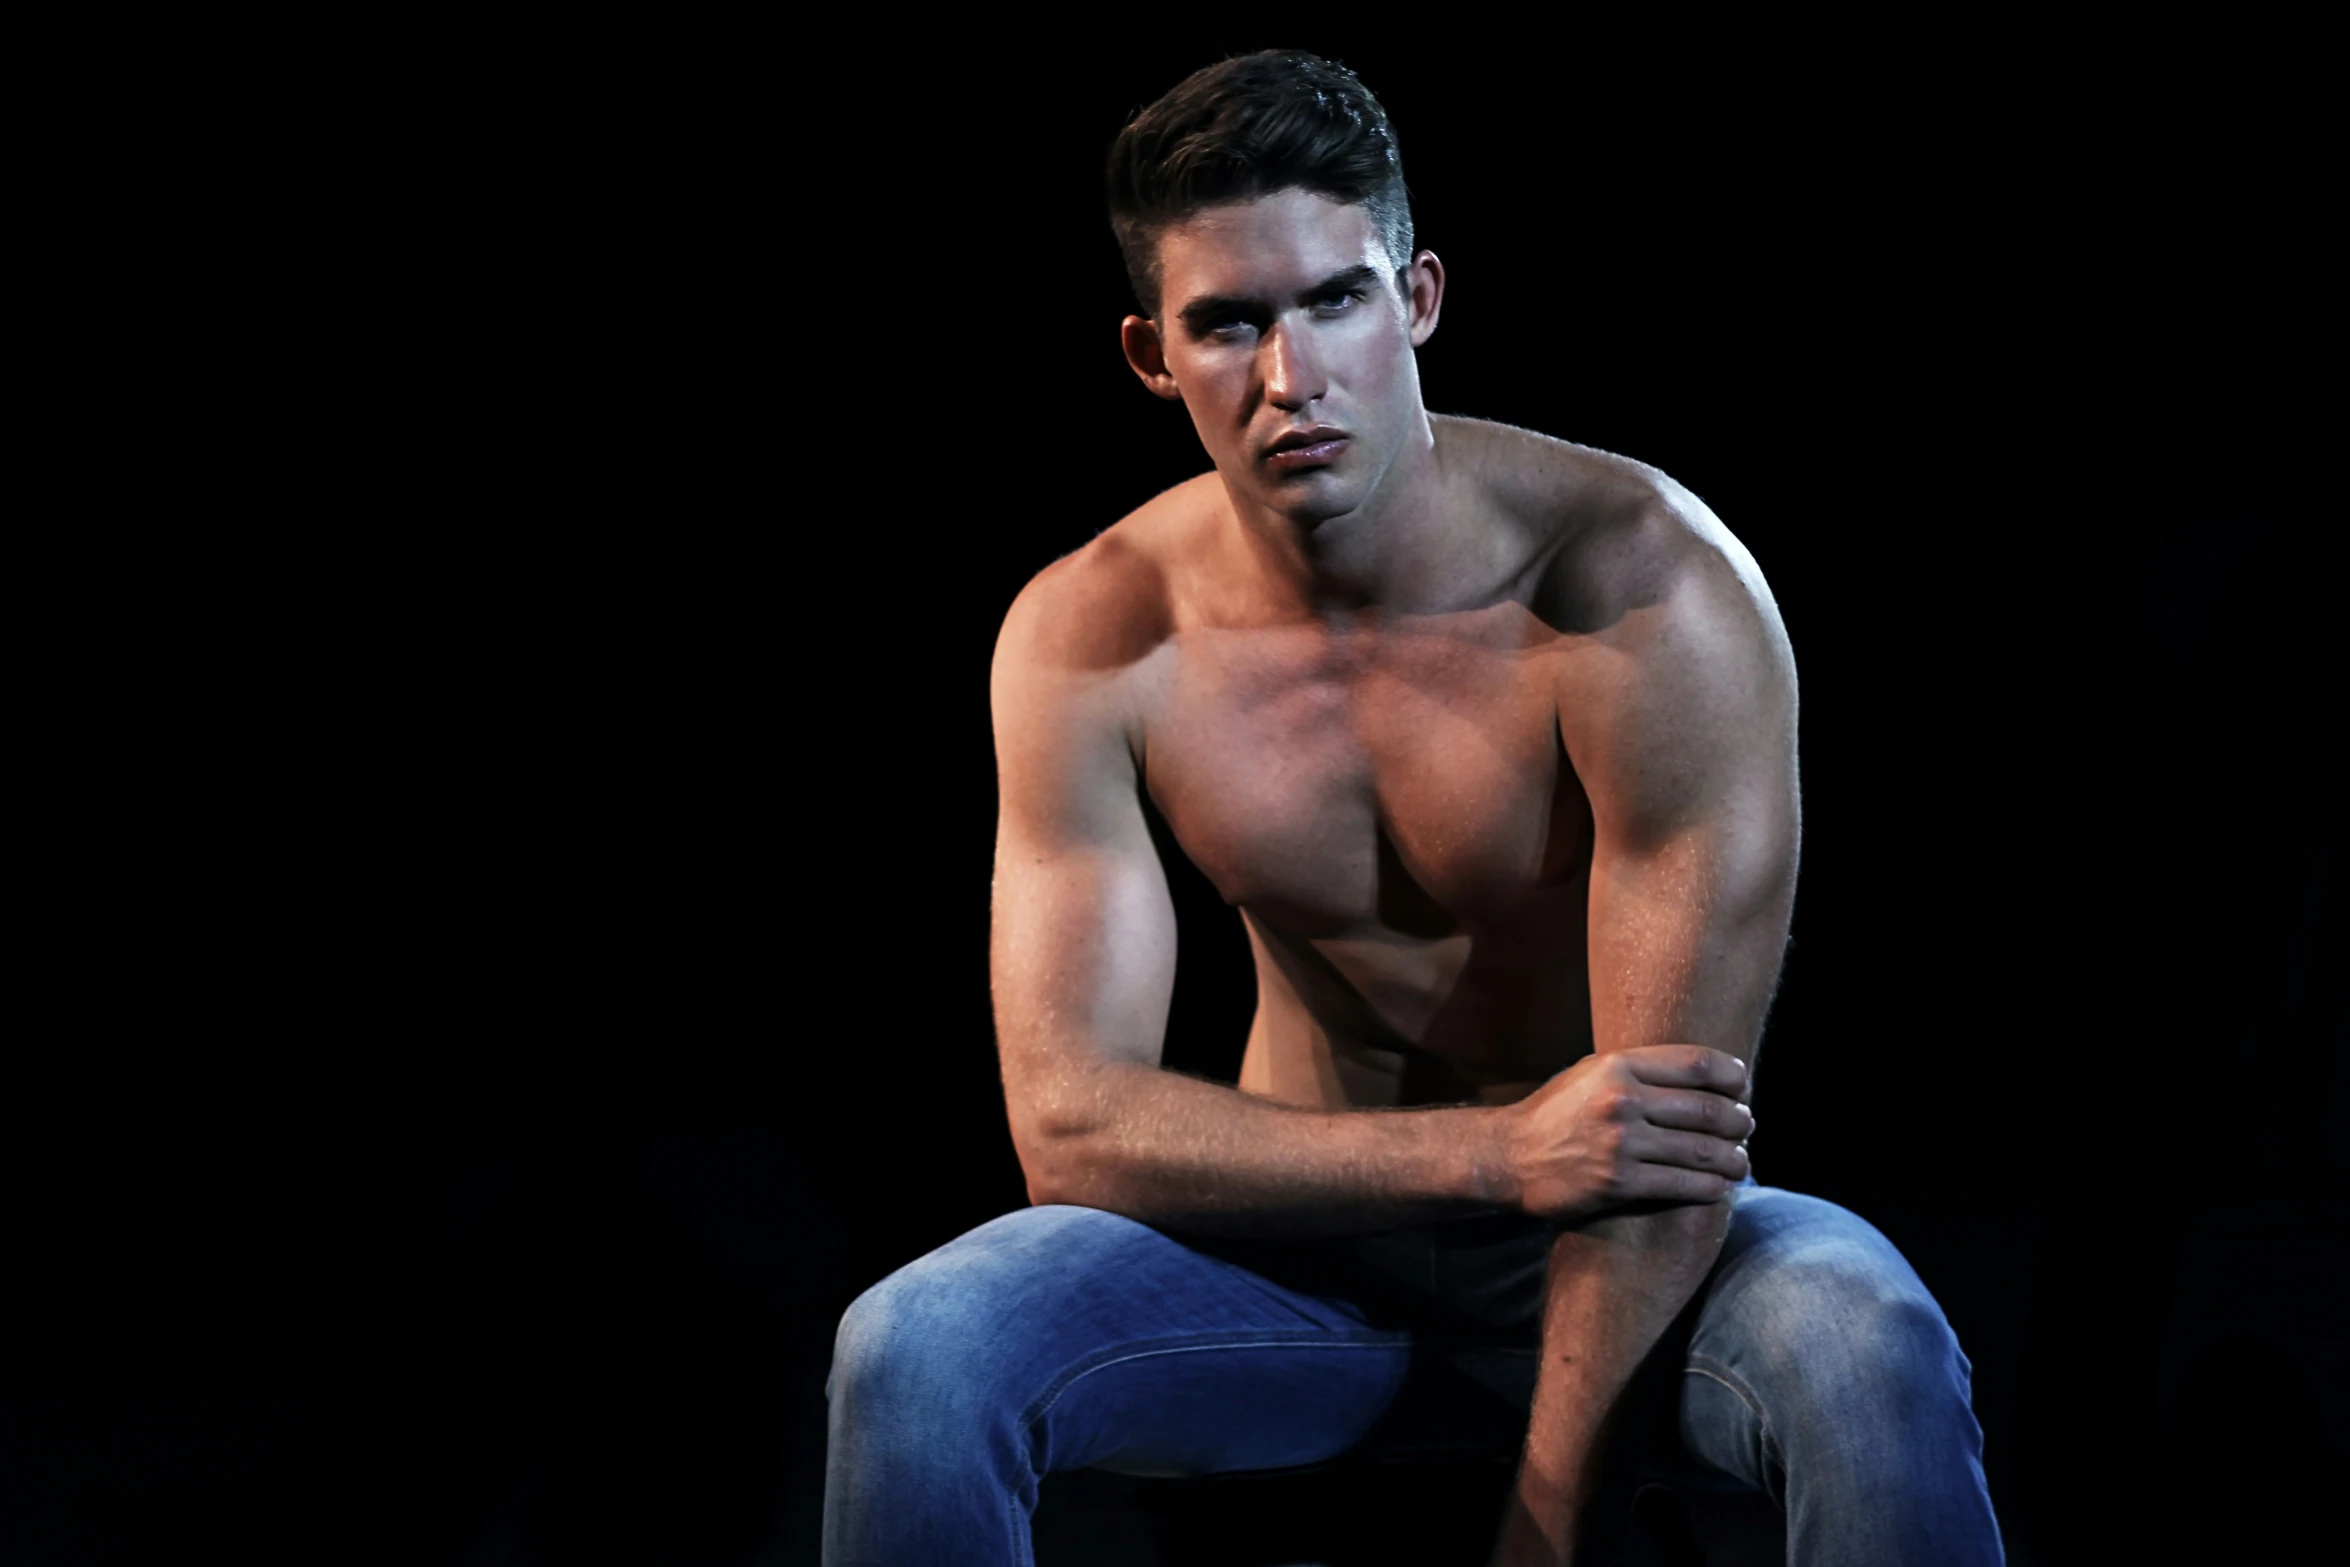 young man sitting shirtless in the spotlight